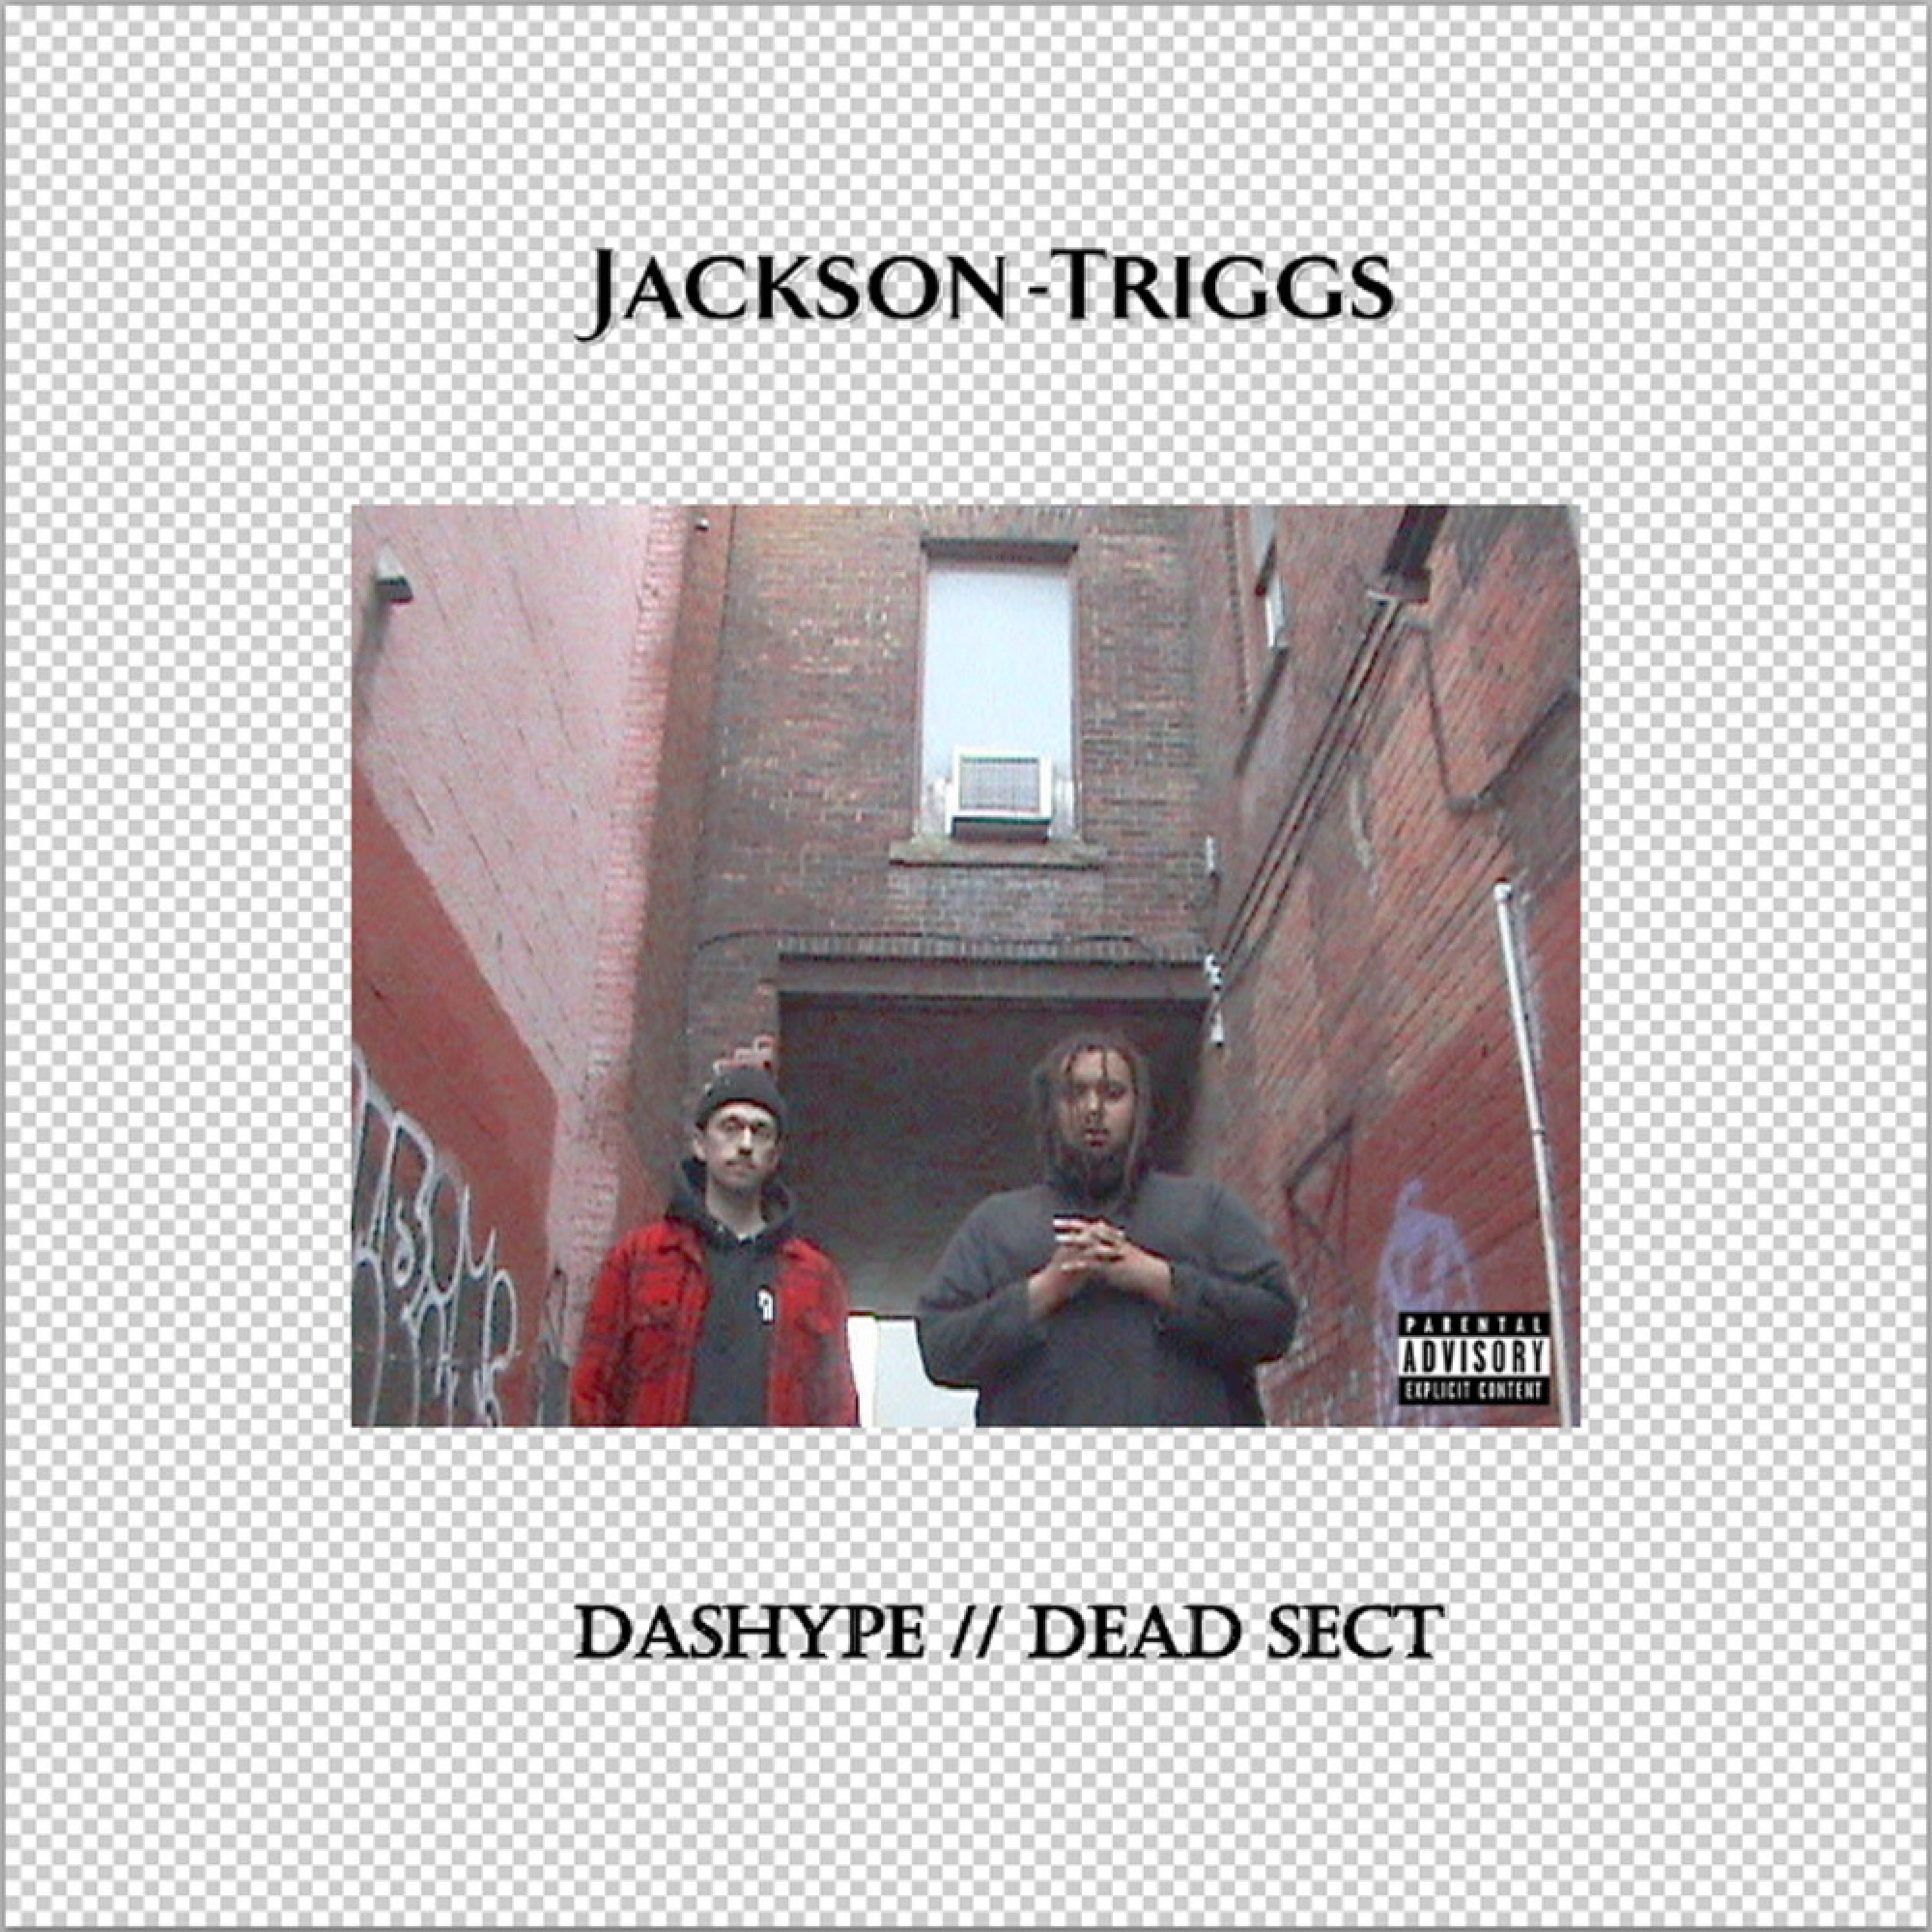 Dashype - Jackson-Triggs (feat. Dead Sect)